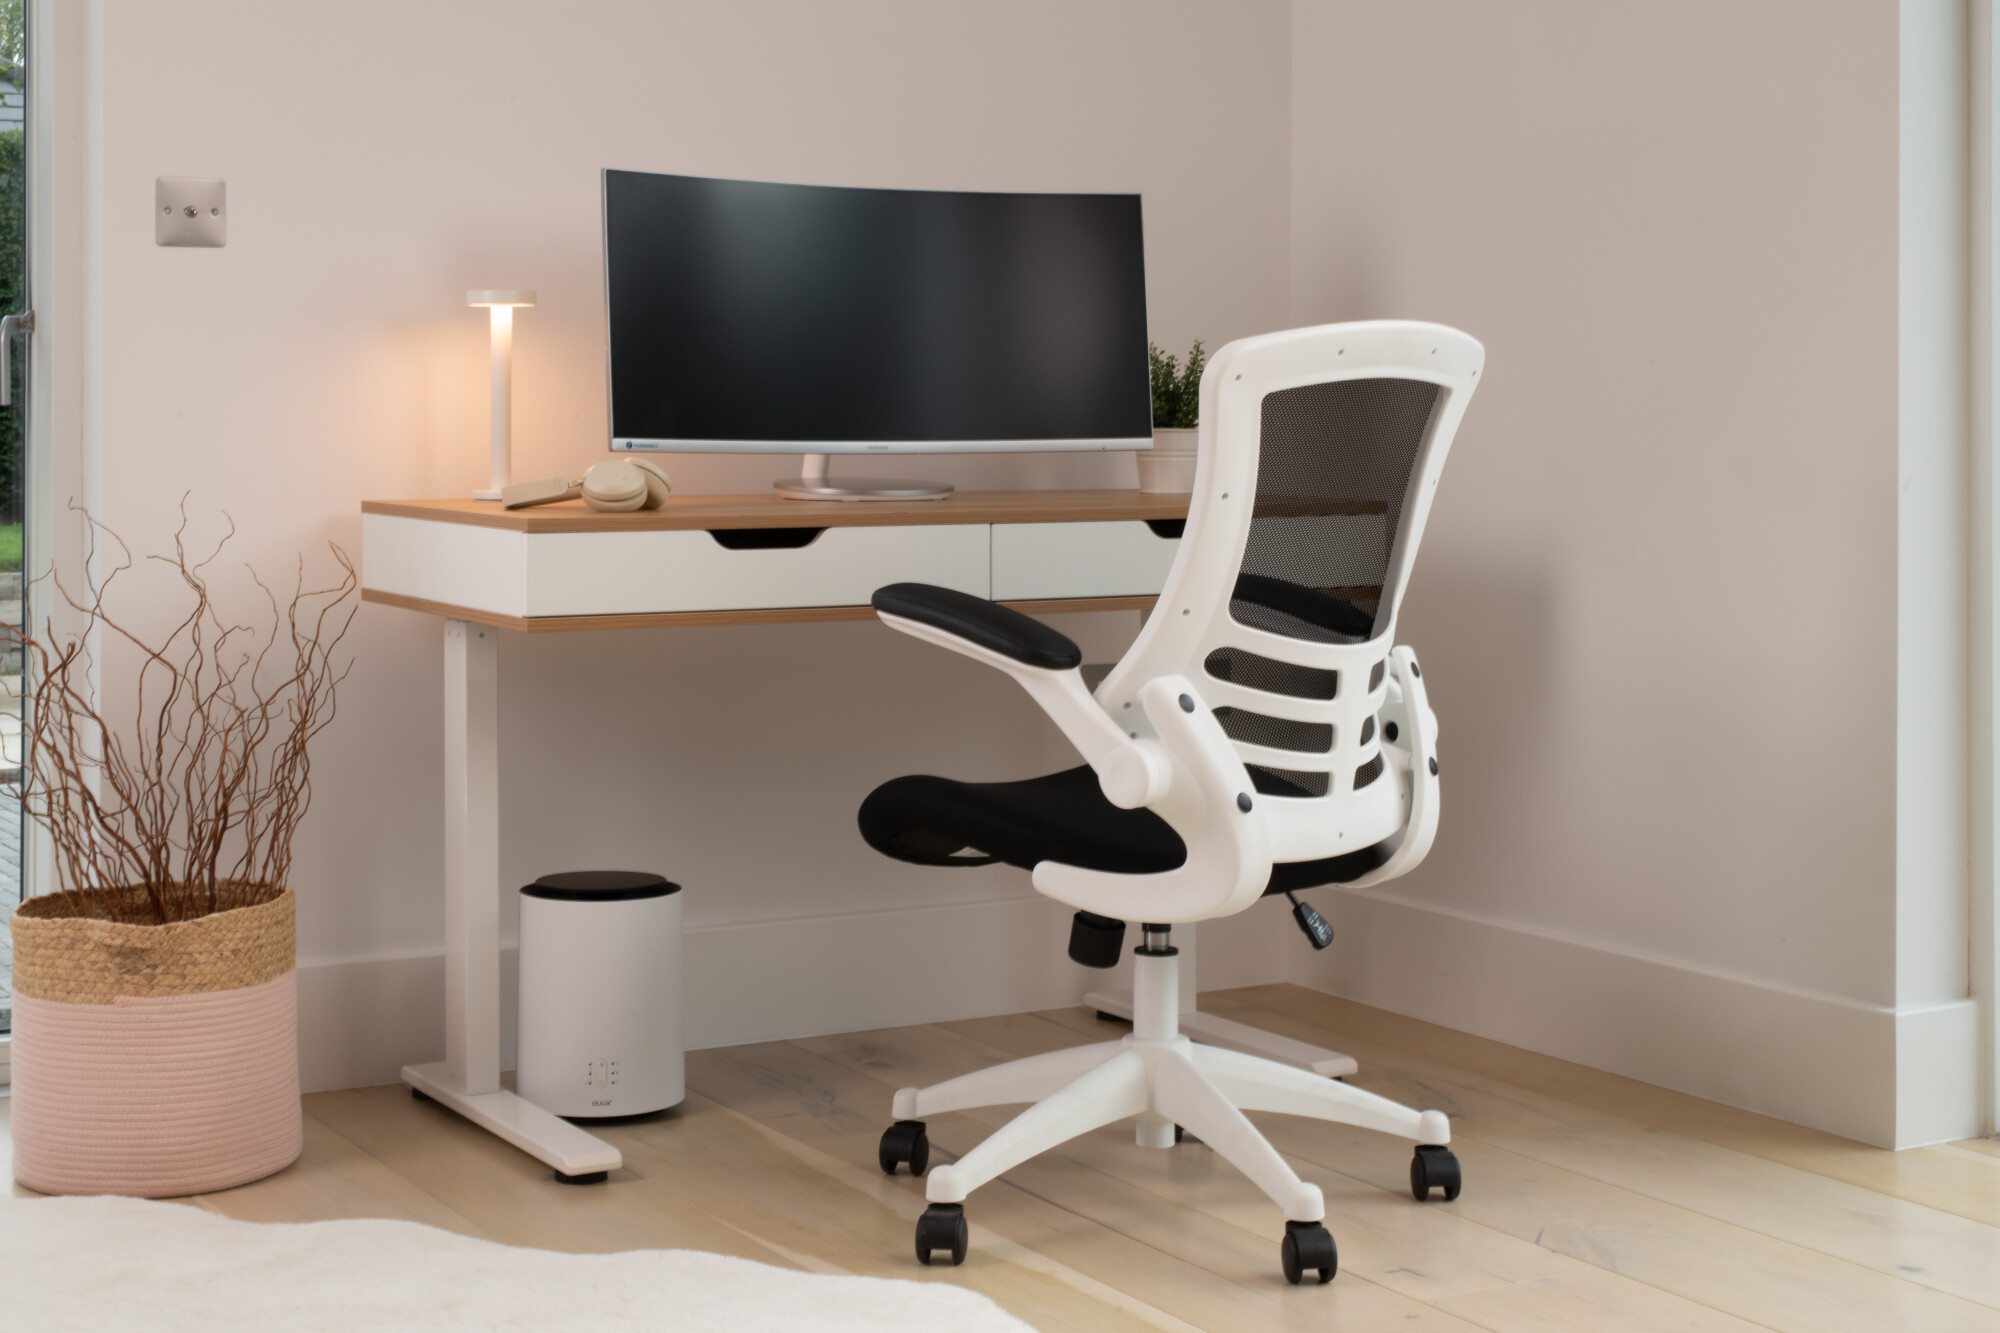 Kobles Ola oak and white height adjustable desk fills the background with the ergonomic Lukas mesh black and white body chair featuring front and centre. 